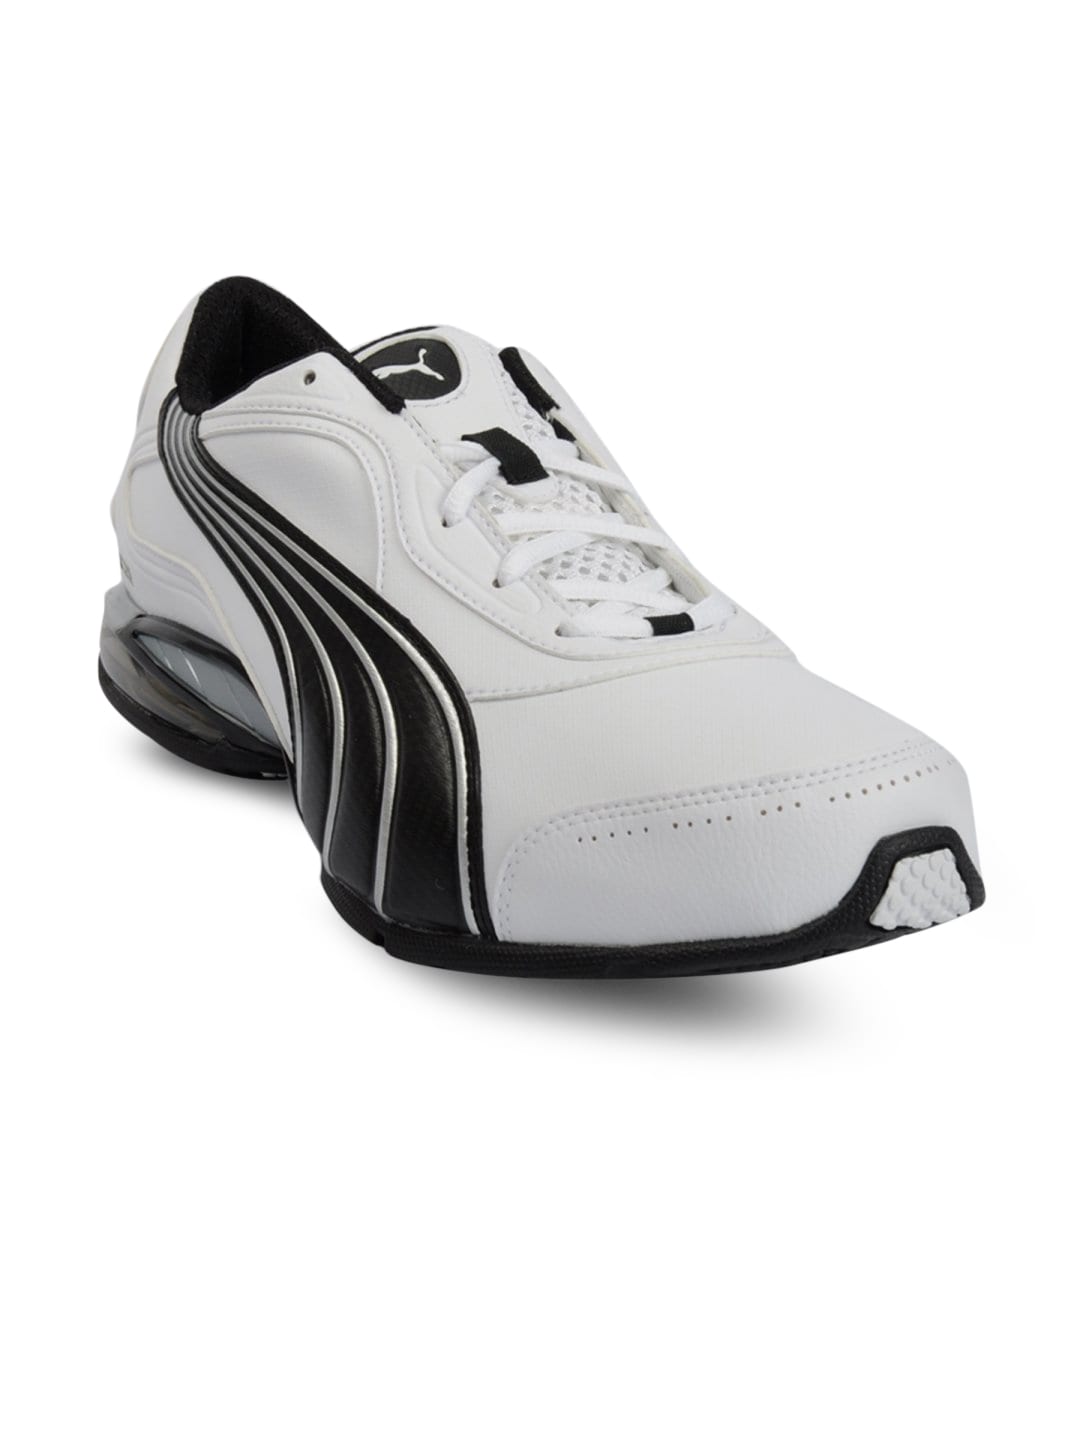 Puma Men Cell Pavo White Casual Shoes